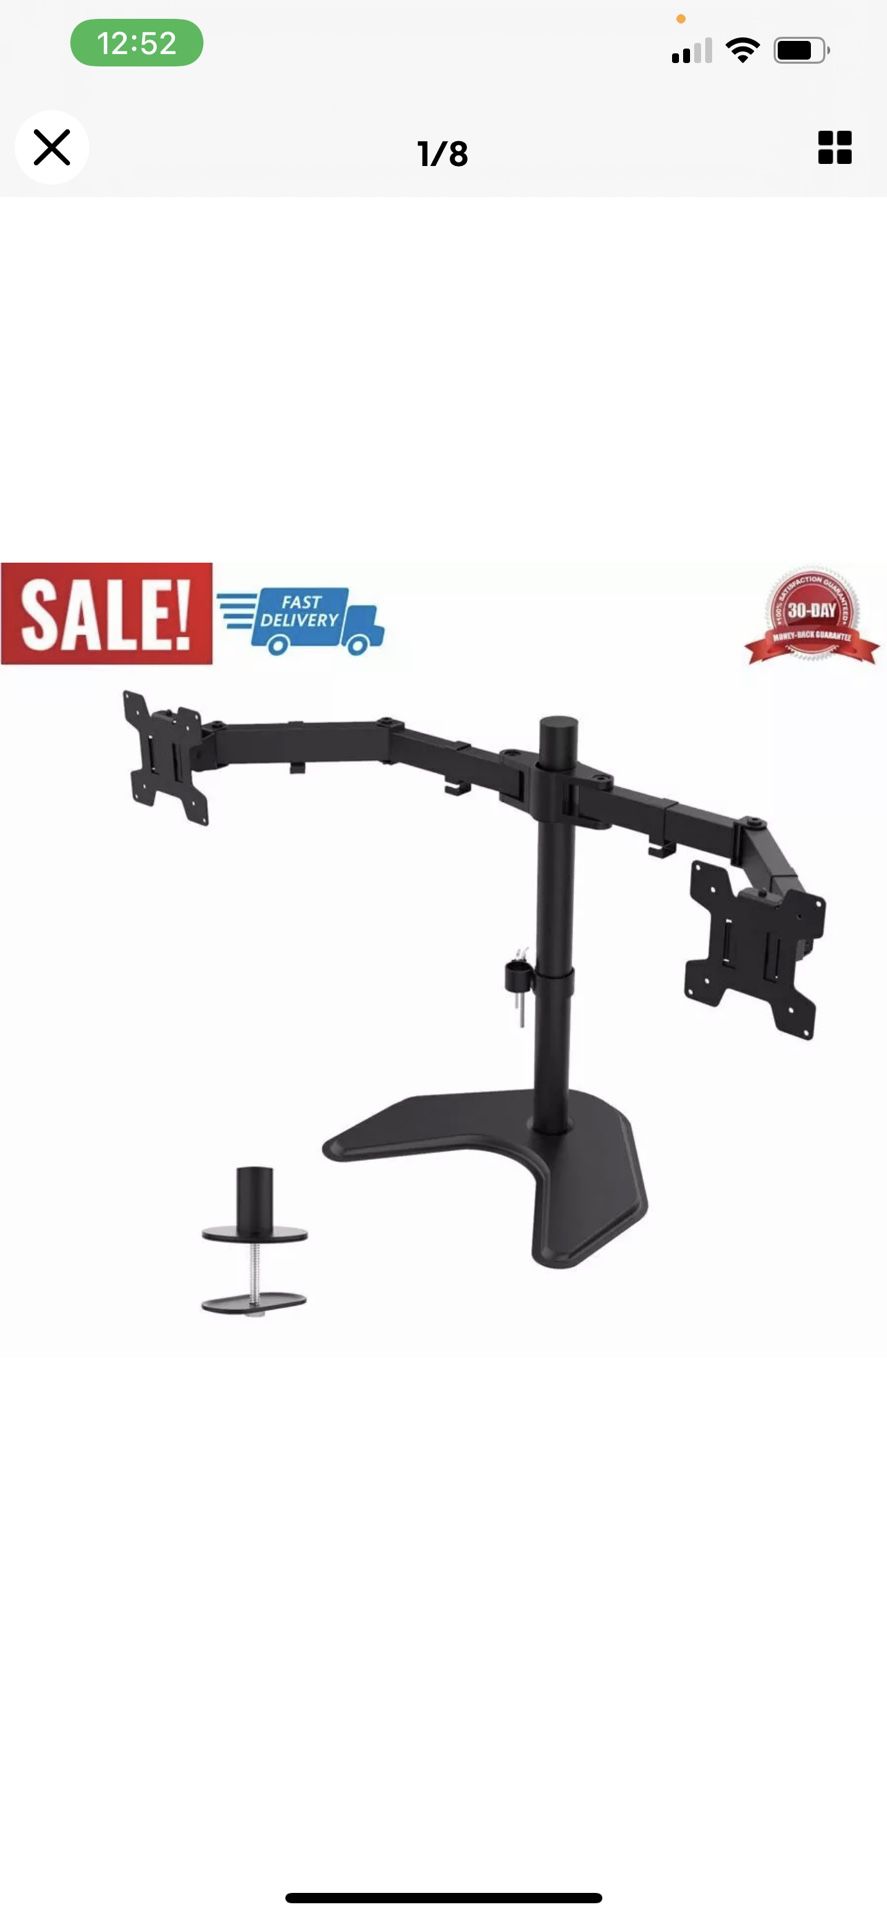 Dual Monitor Stand, Monitor Stands for 2 Monitors Desk Mount for 13 to 32 inches Computer Screen, Heavy Duty Fully Adjustable Dual Monitor Arm Vesa Mo